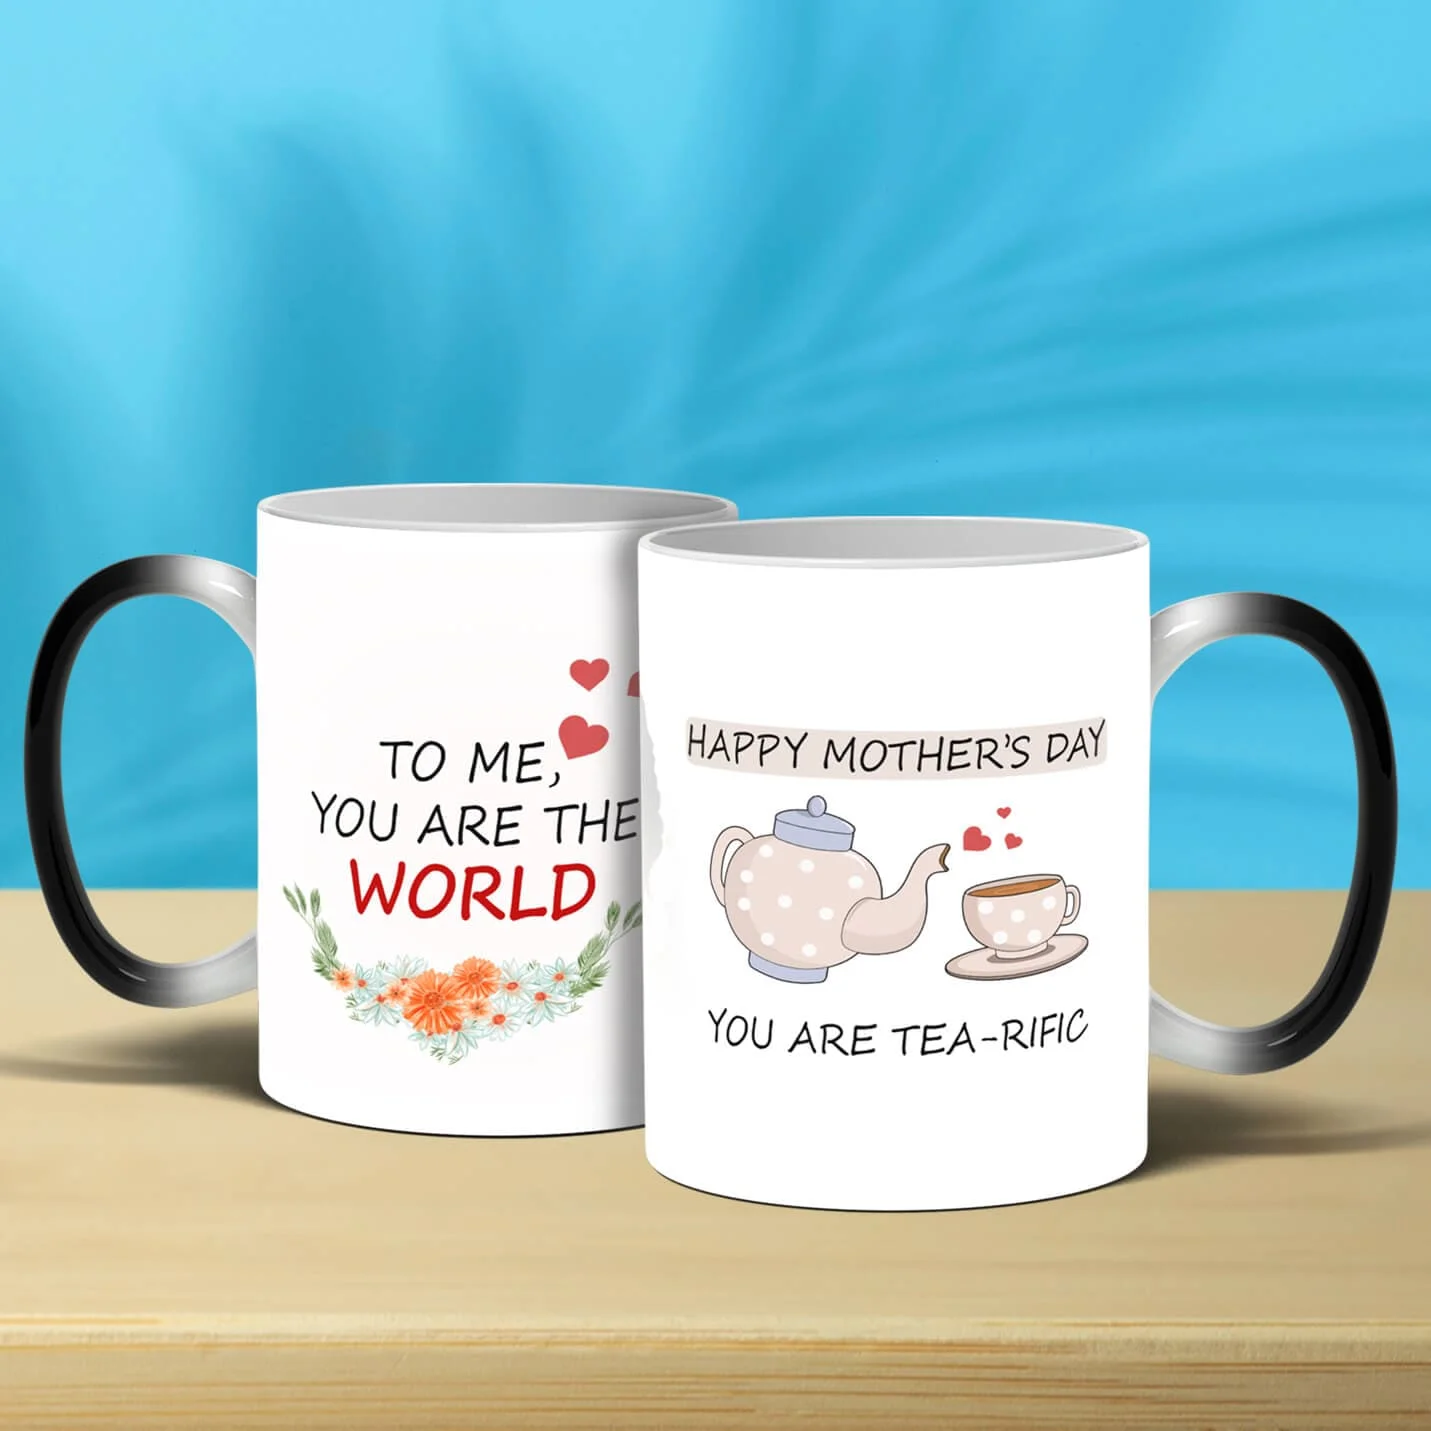 Gift her this Magic Mug for her morning tea and coffee